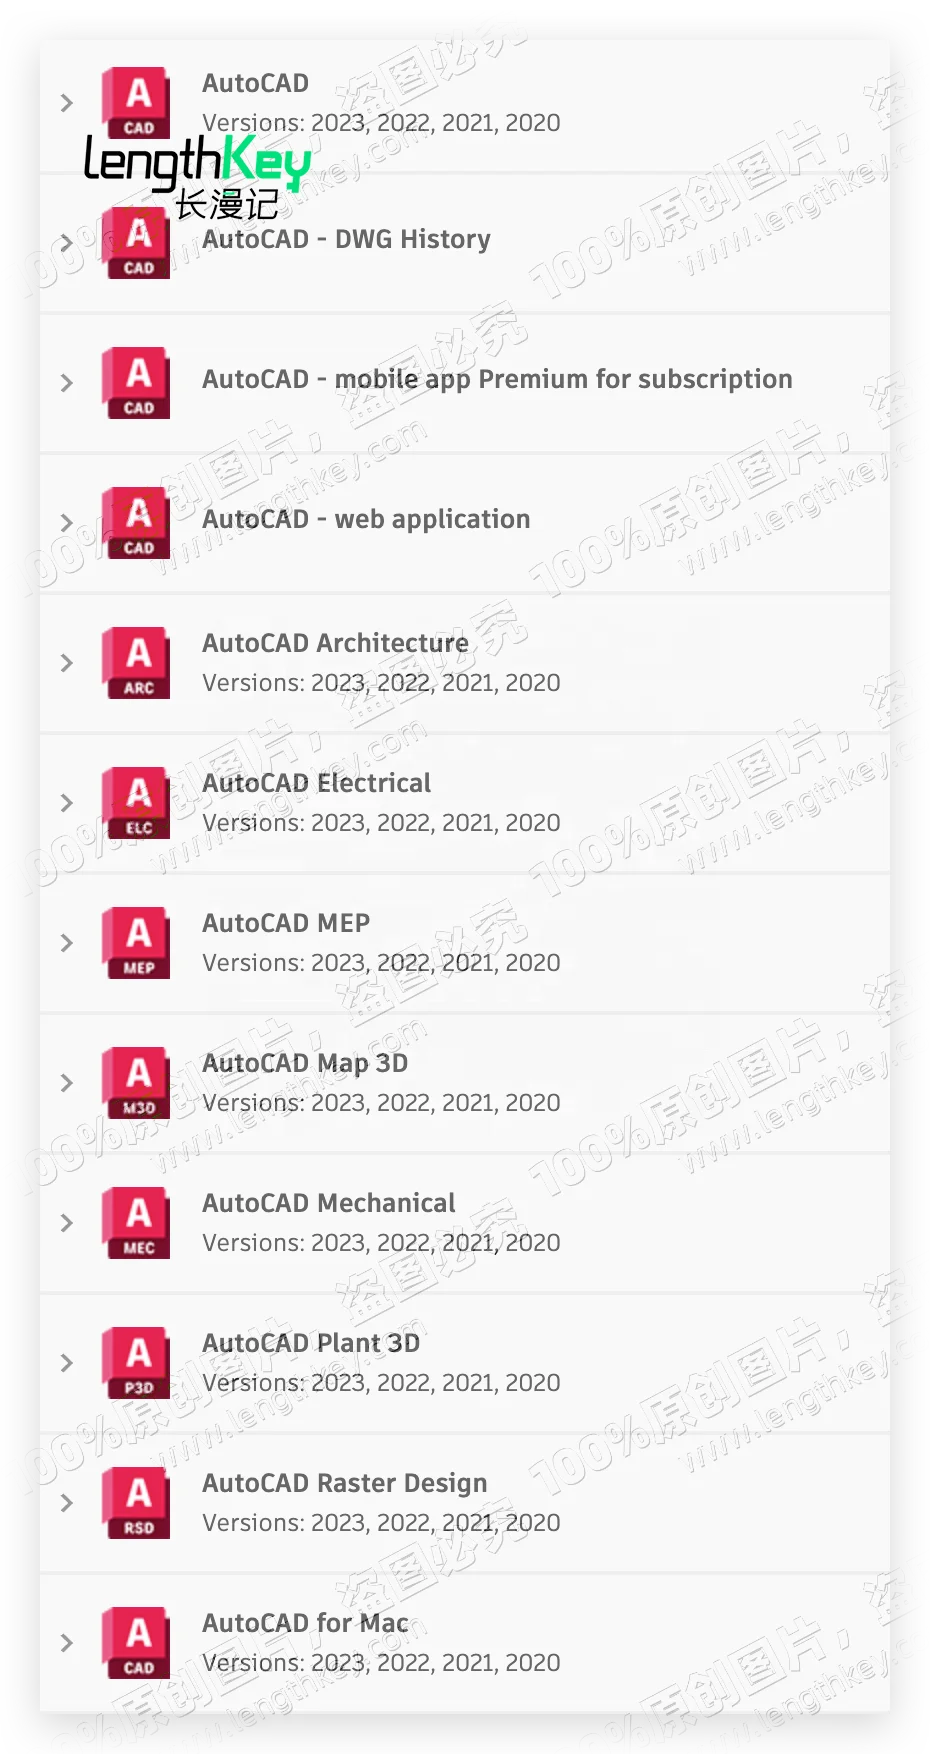 24/7 Online Genuine License Key Autodesk AutoCAD Subscription 2023/2022/2021/2020 for Mac/PC/iPad Drafting Drawing Tool Software